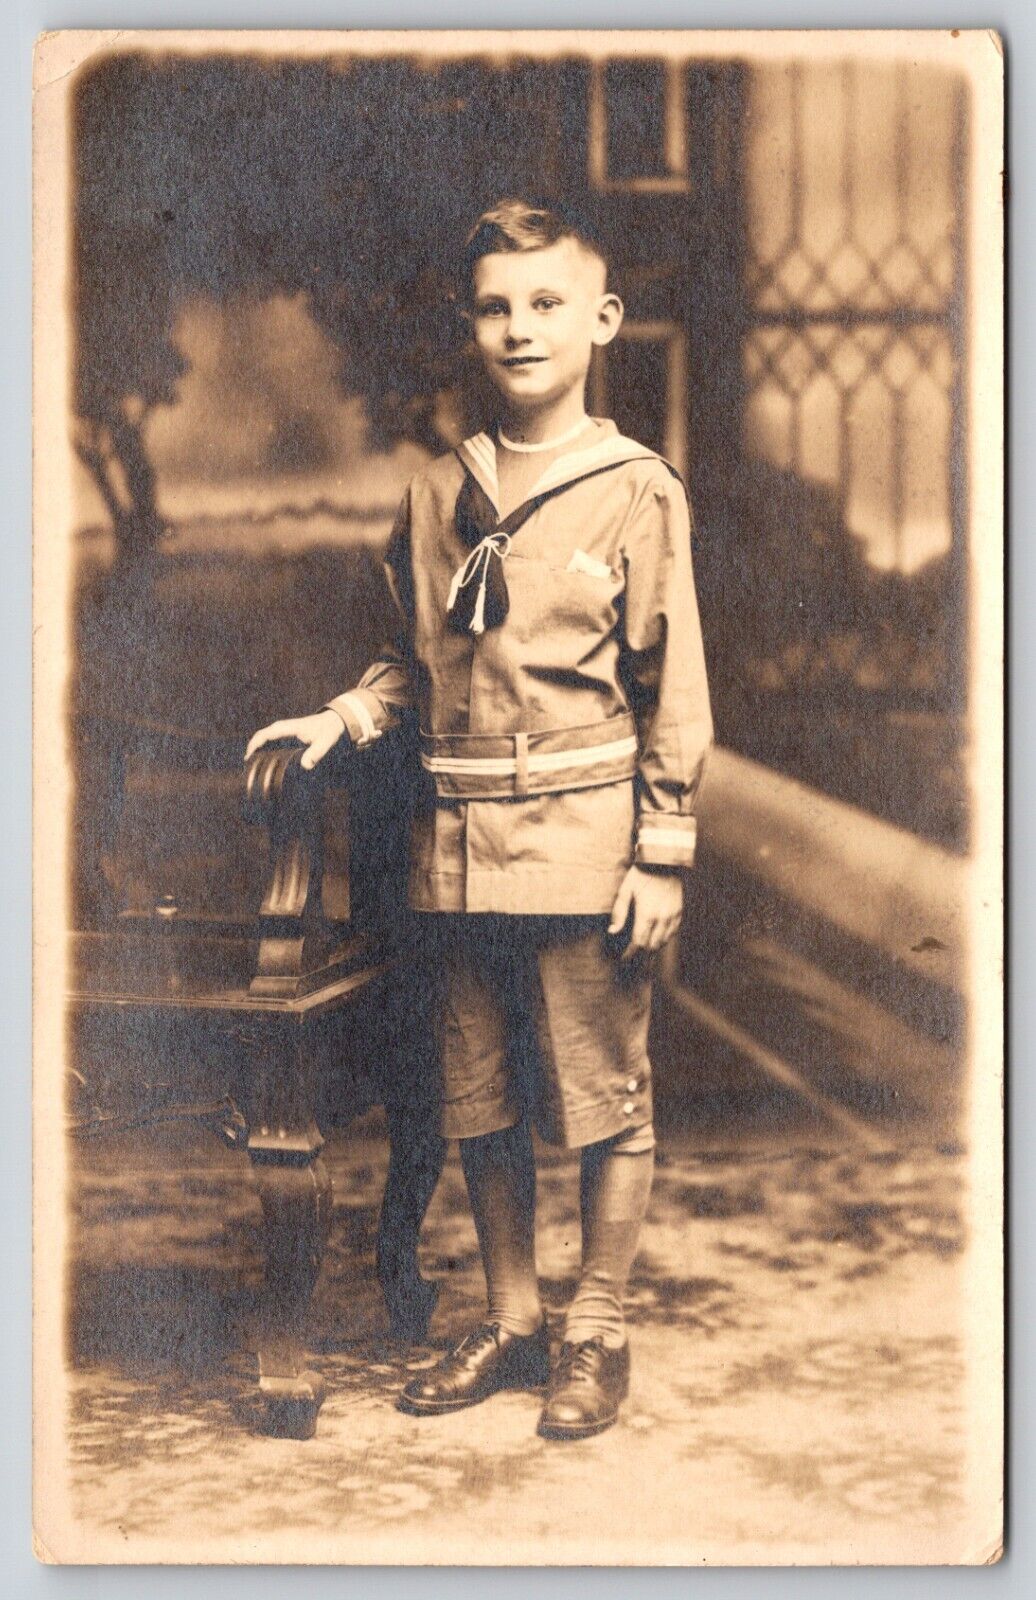 Postcard RPPC Boy in Uniform with Pocket Square Real Photo Children